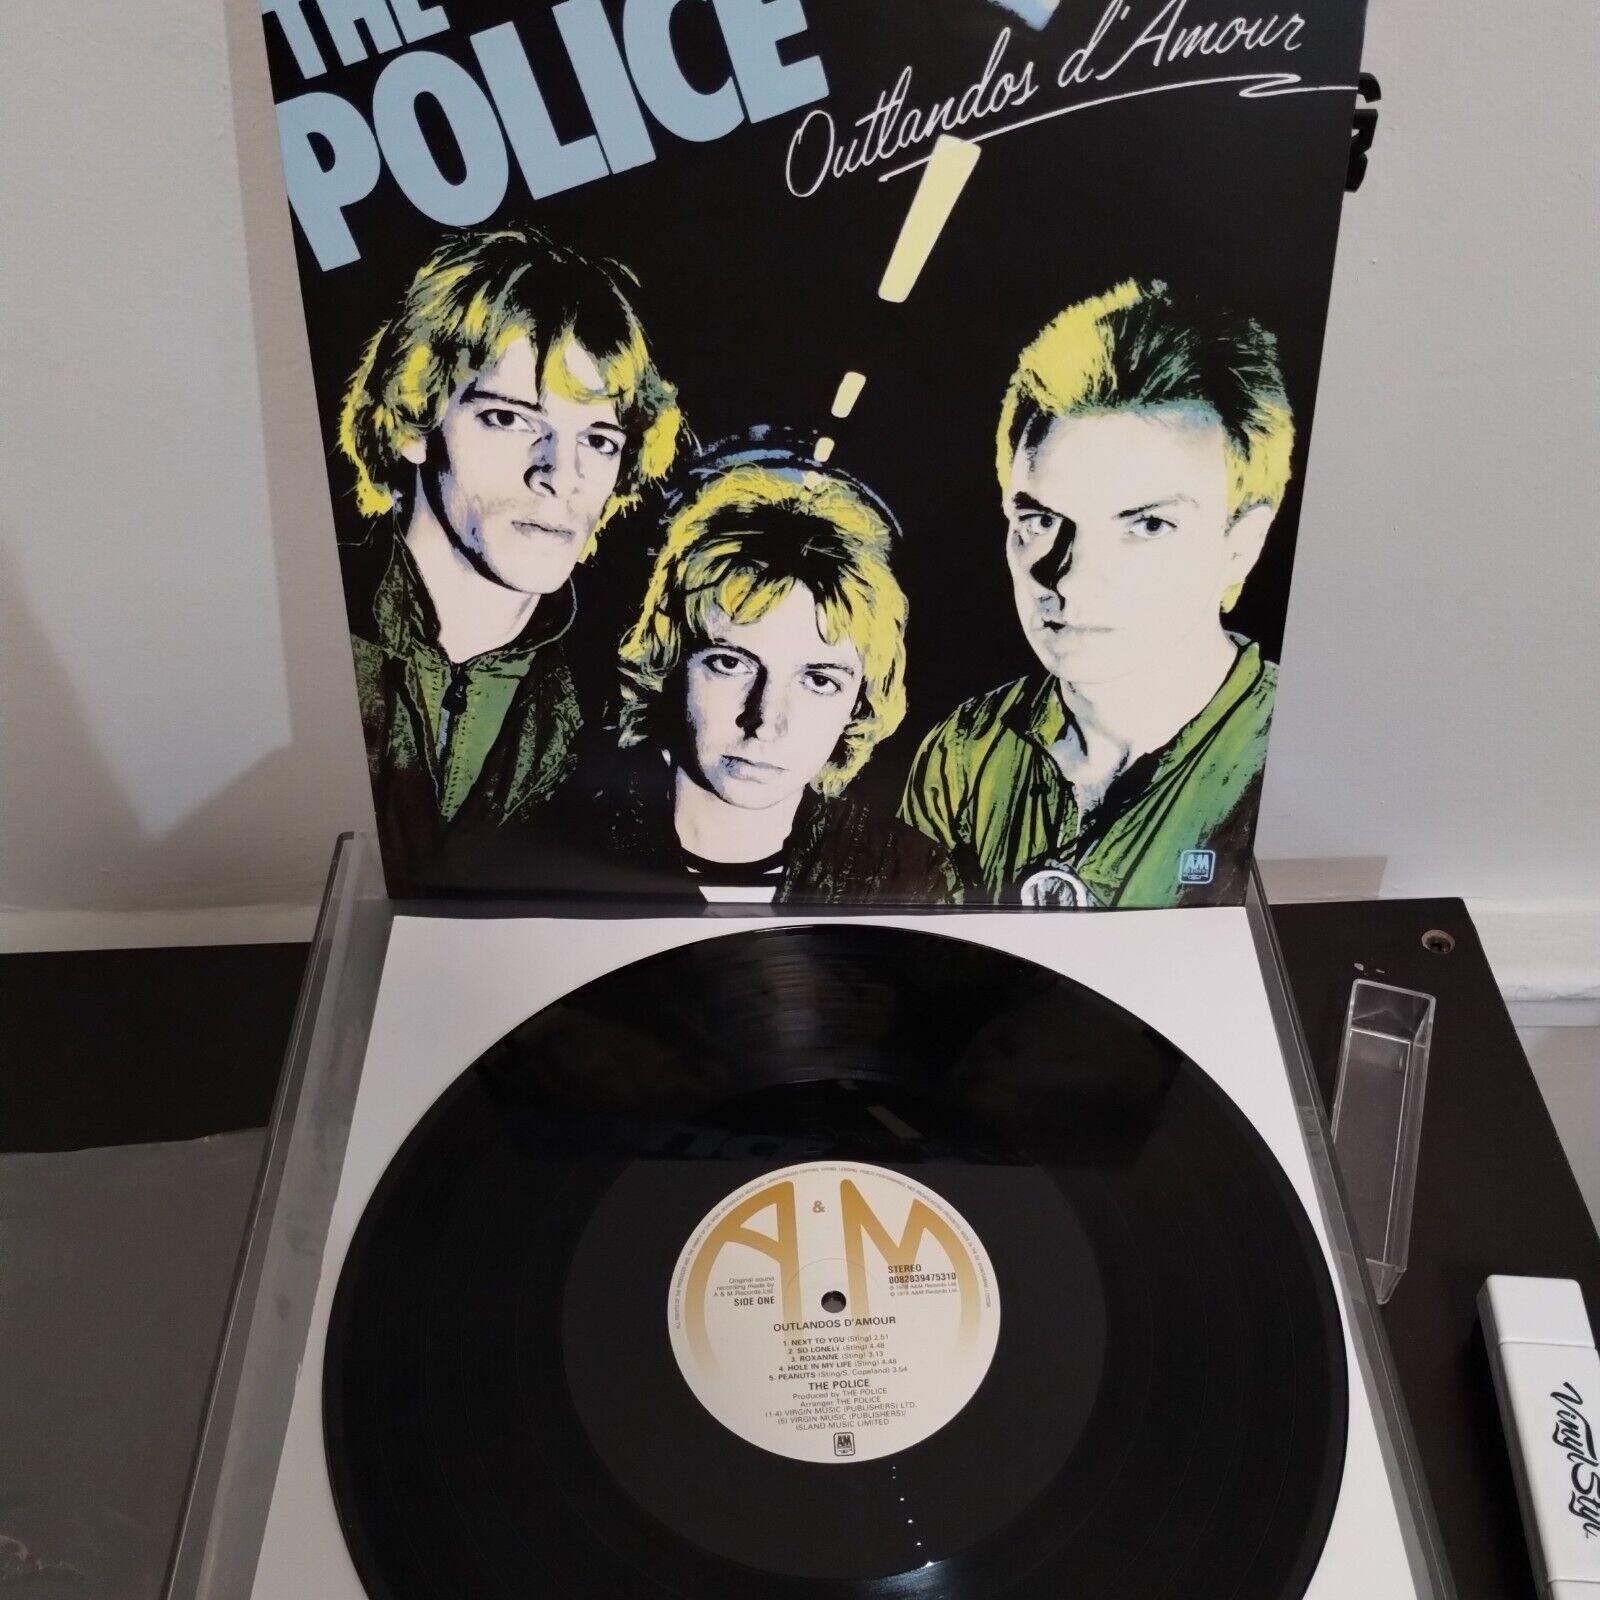 Outlandos D'amour by Police Vinyl Reissue VG